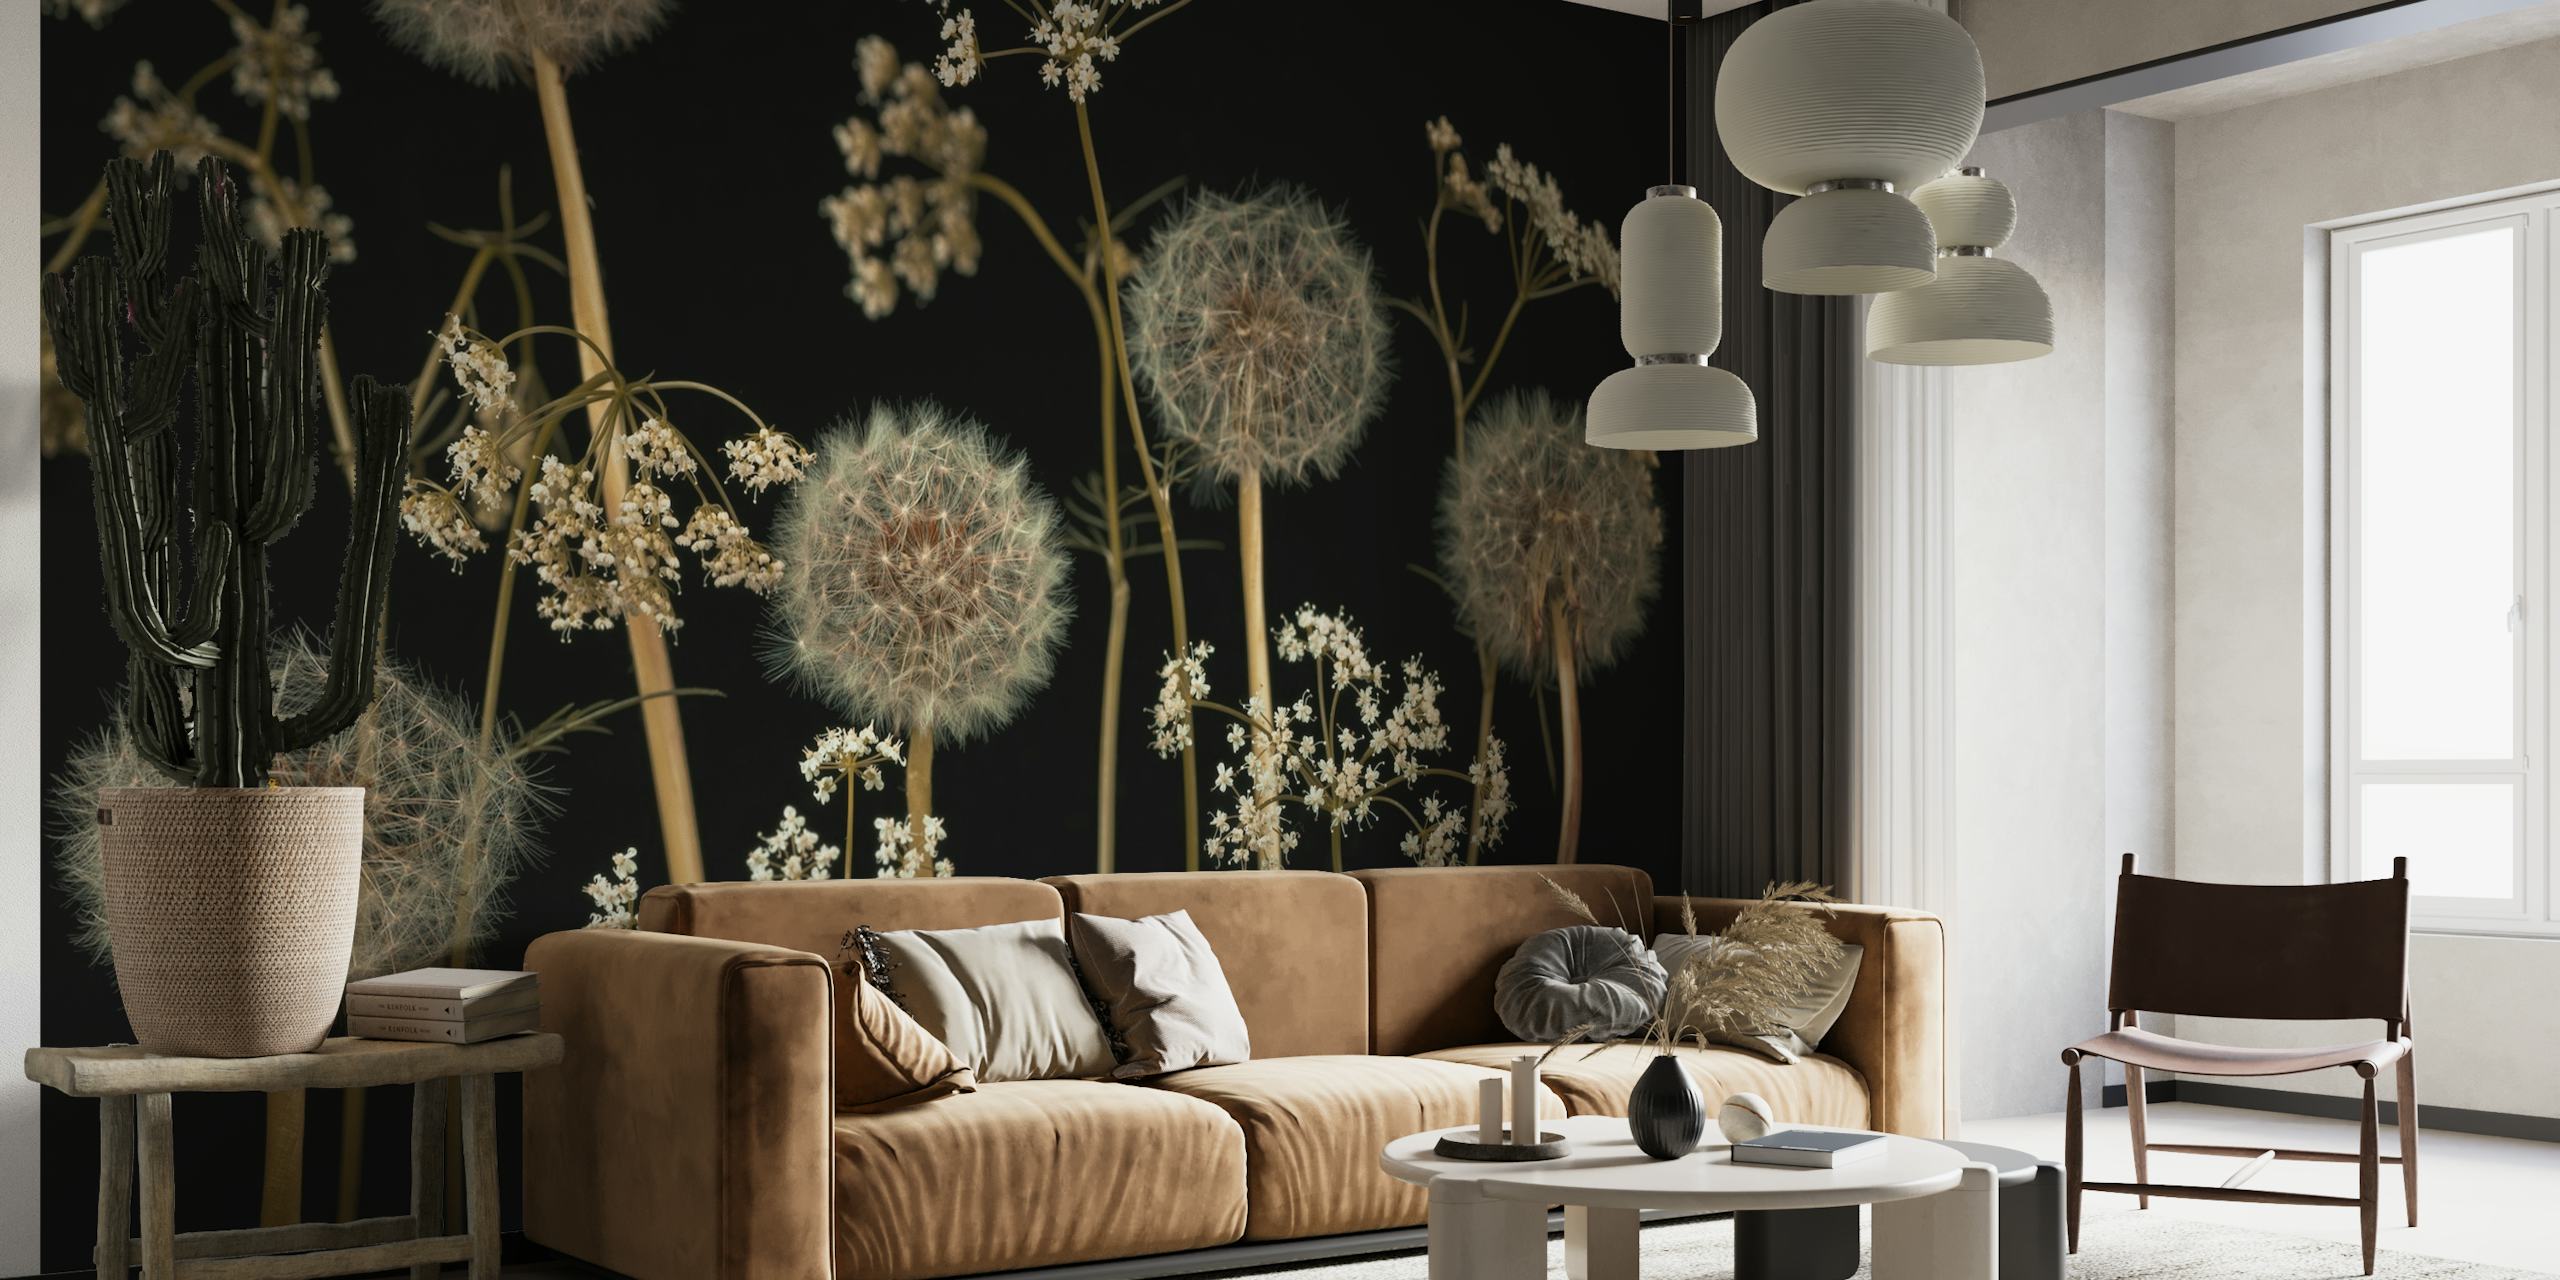 Meadow Flowers 4 wall mural featuring dandelions and wildflowers on a black background